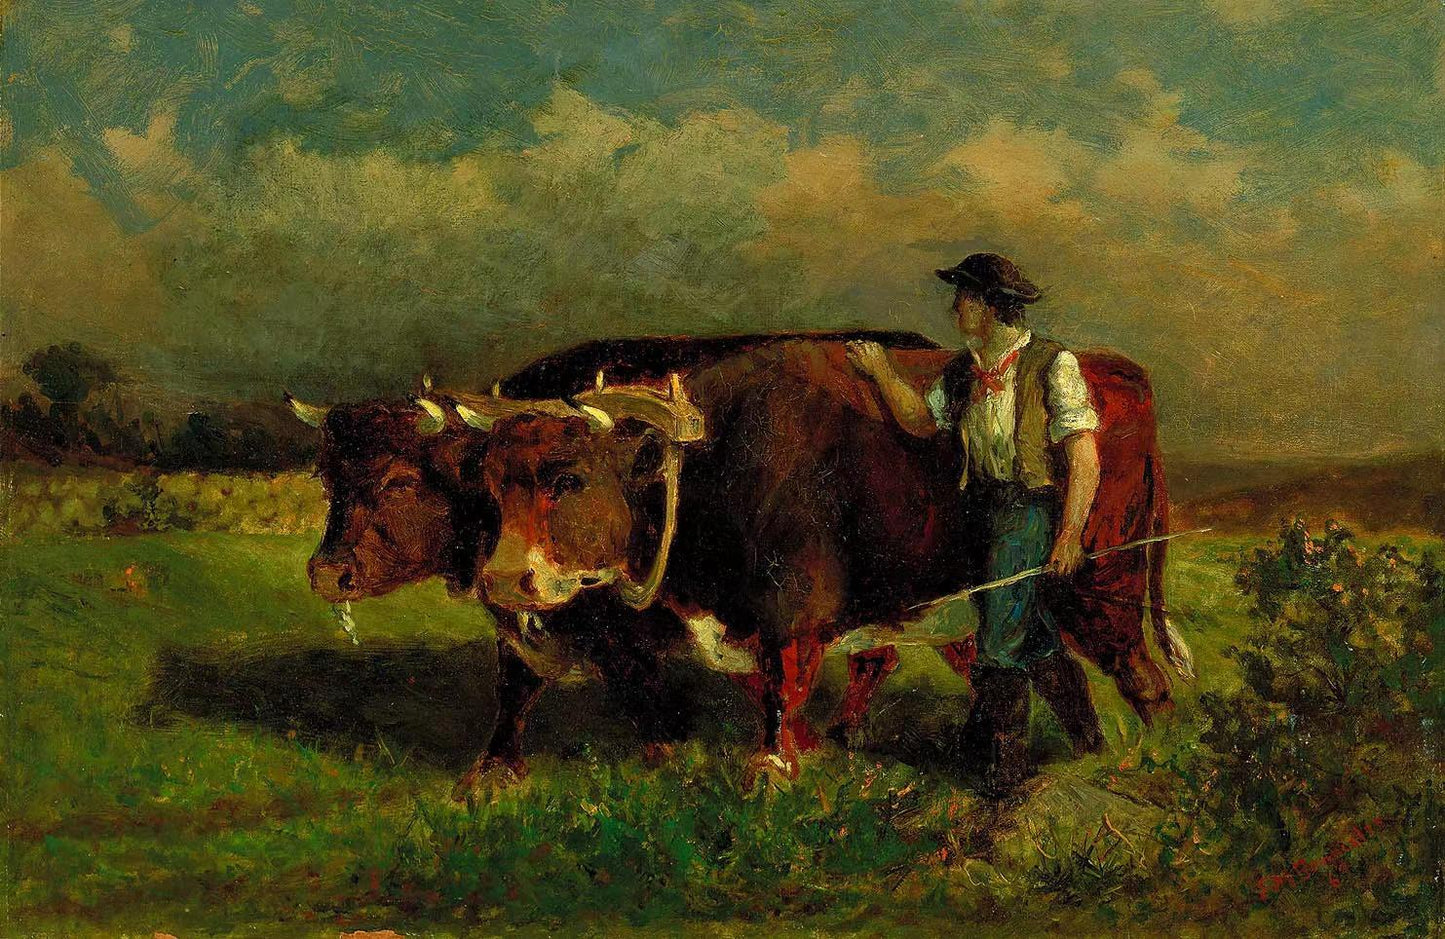 man with two oxen,Edward Mitchell Bannister,1828-1901